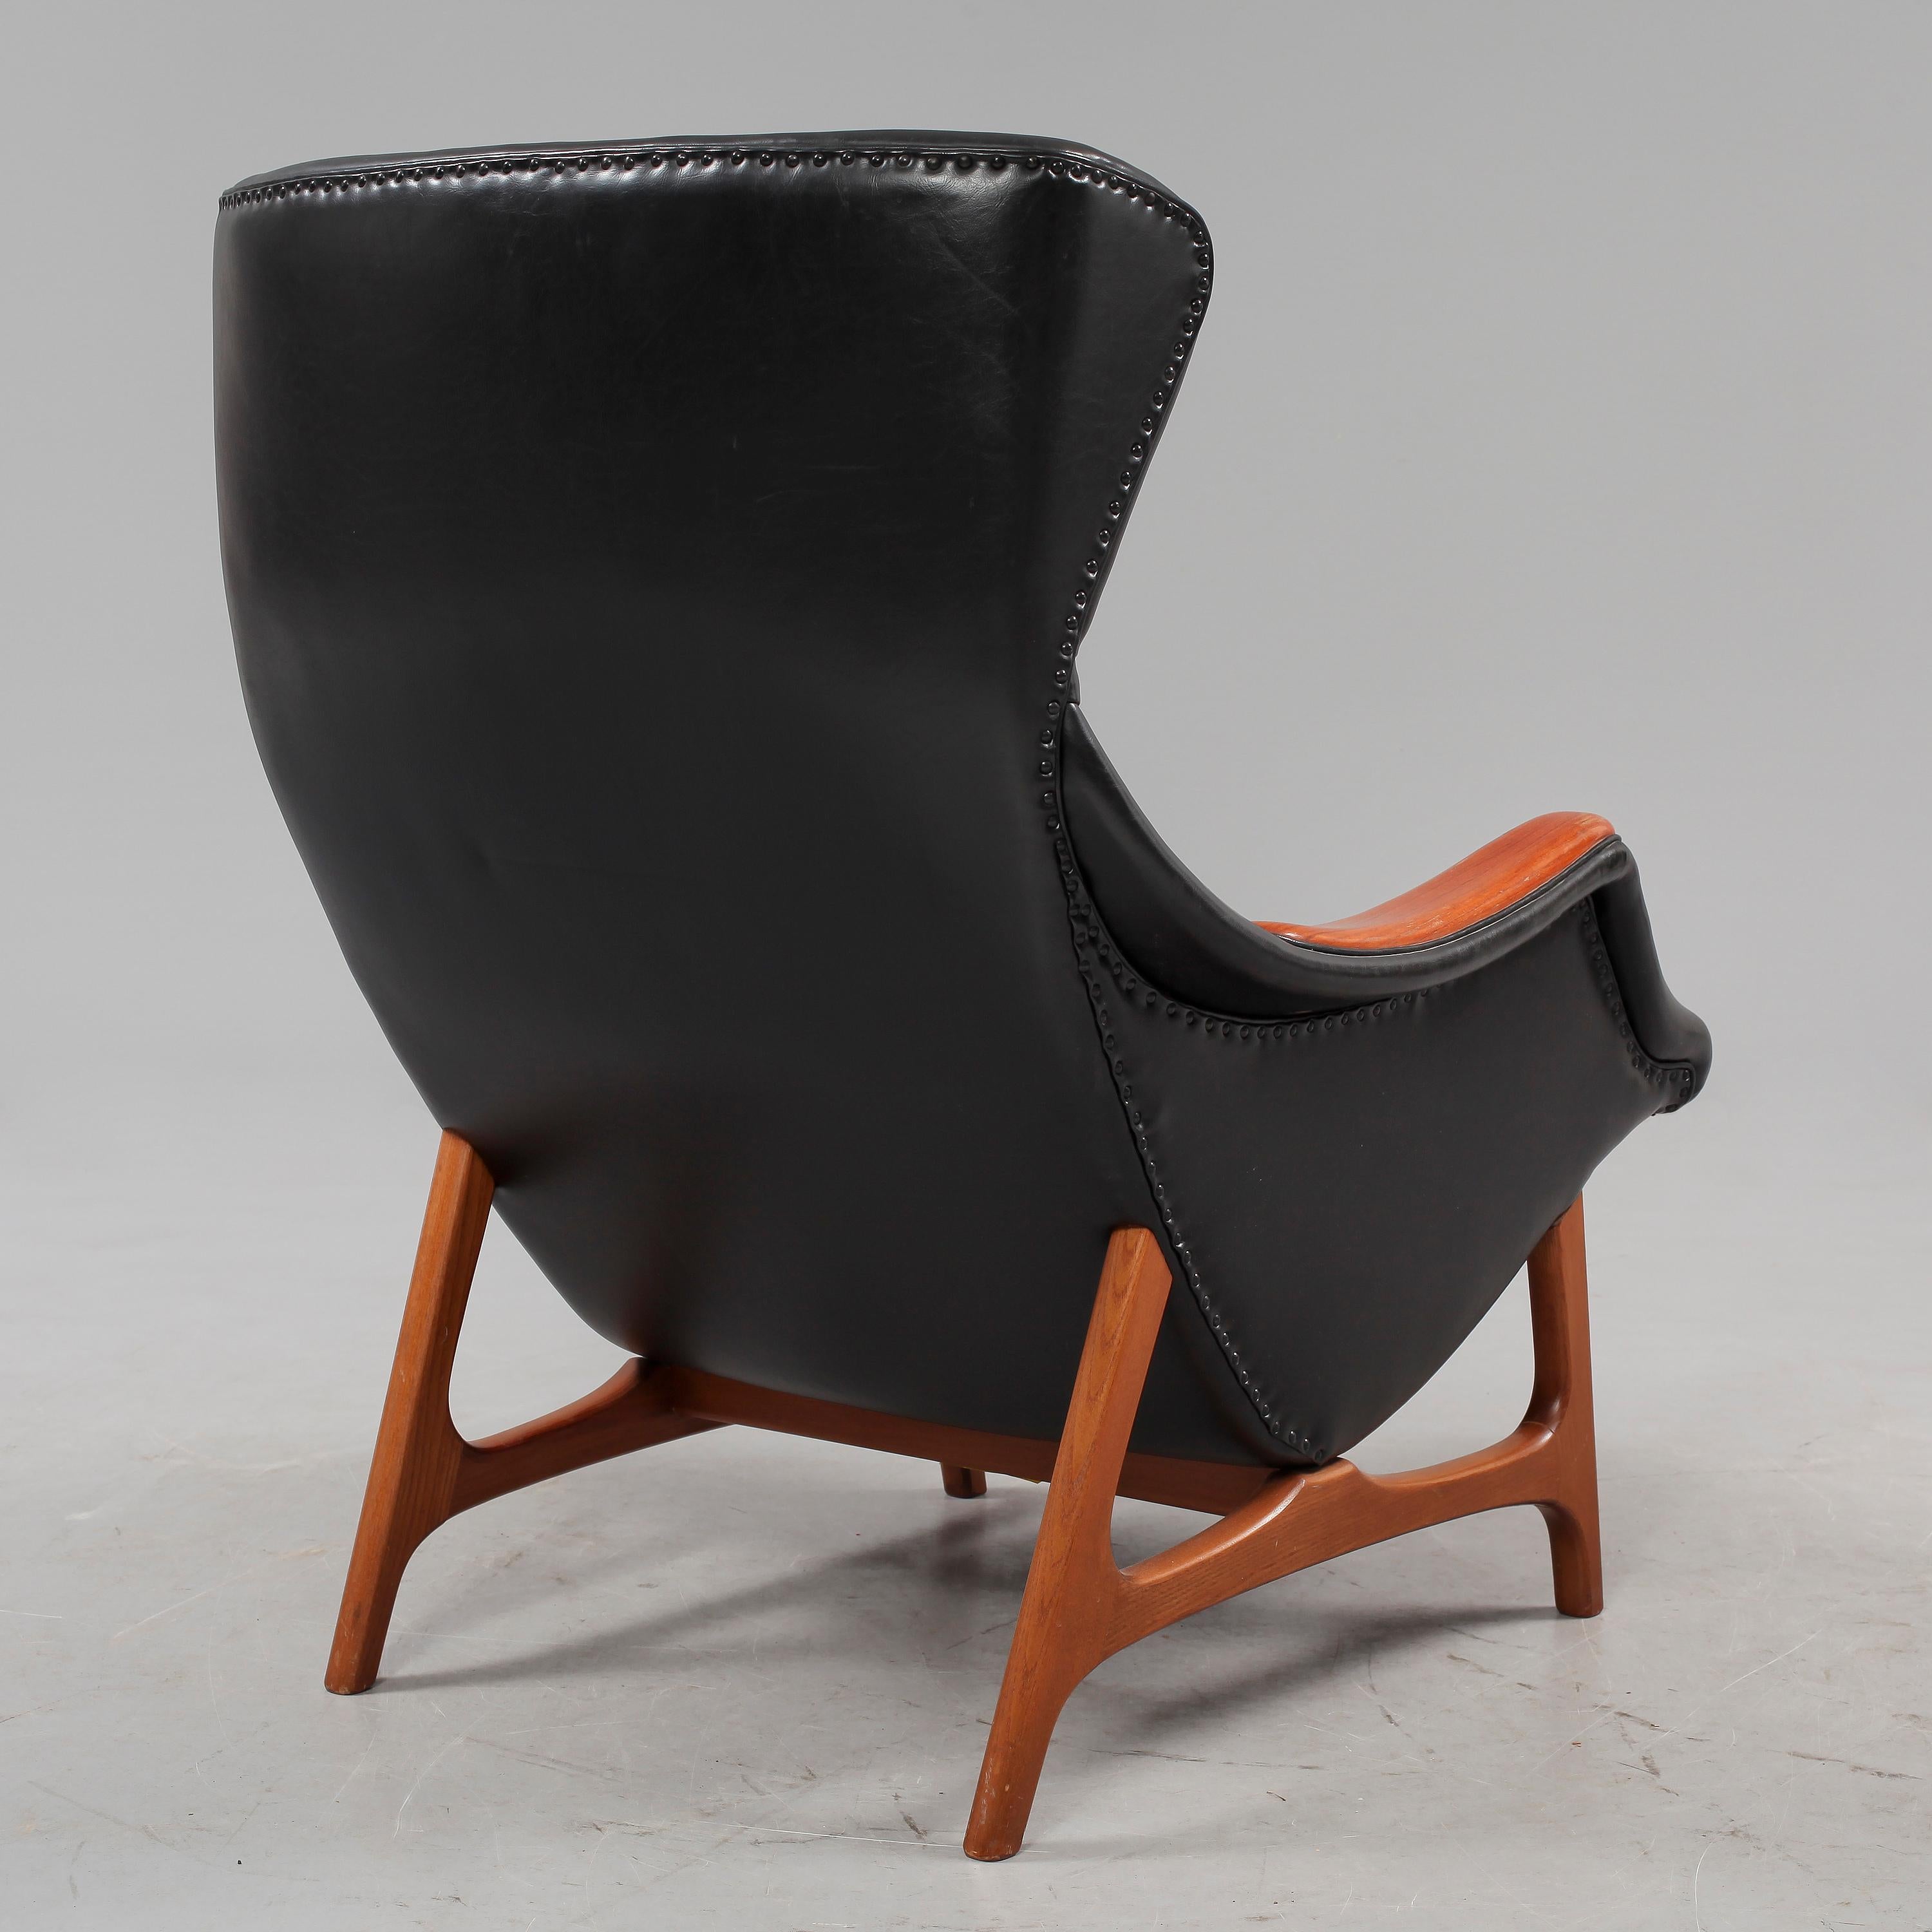 lounge chair designed by B J Hansen made in Norway around  1960.
Lounge chair + side table that becomes a footstool when the top is turned upside down. Draft 1960s. Teak, black synthetic leather. Armchair: 95 x 73 x 89 cm. Stool: 39 x 65 x 48